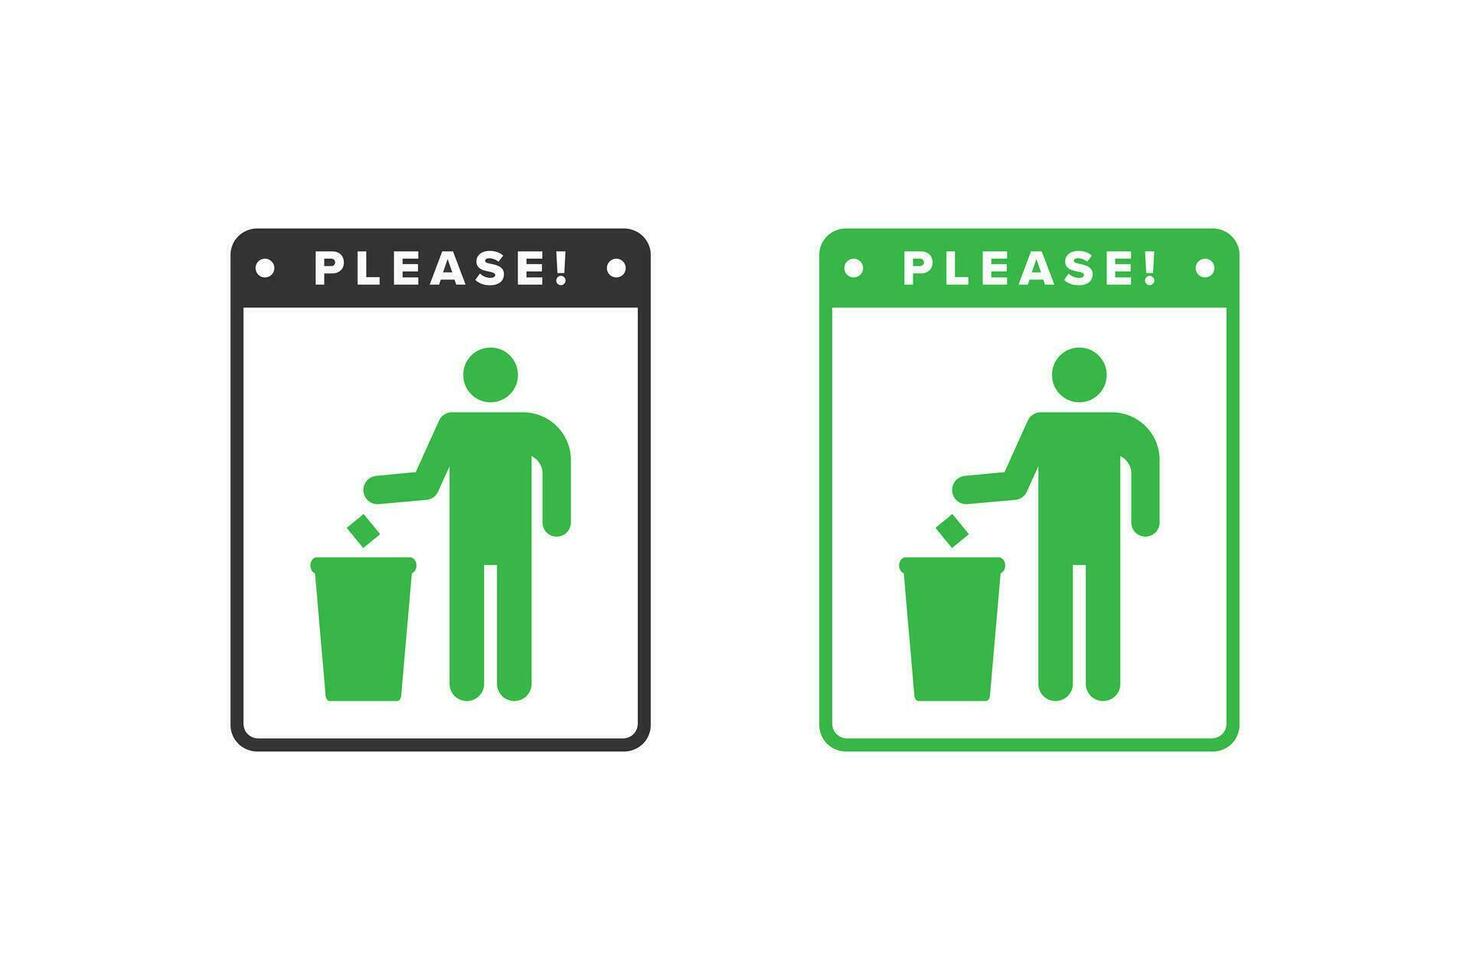 Trash icon design vector green color, icon board people throw trash in its place